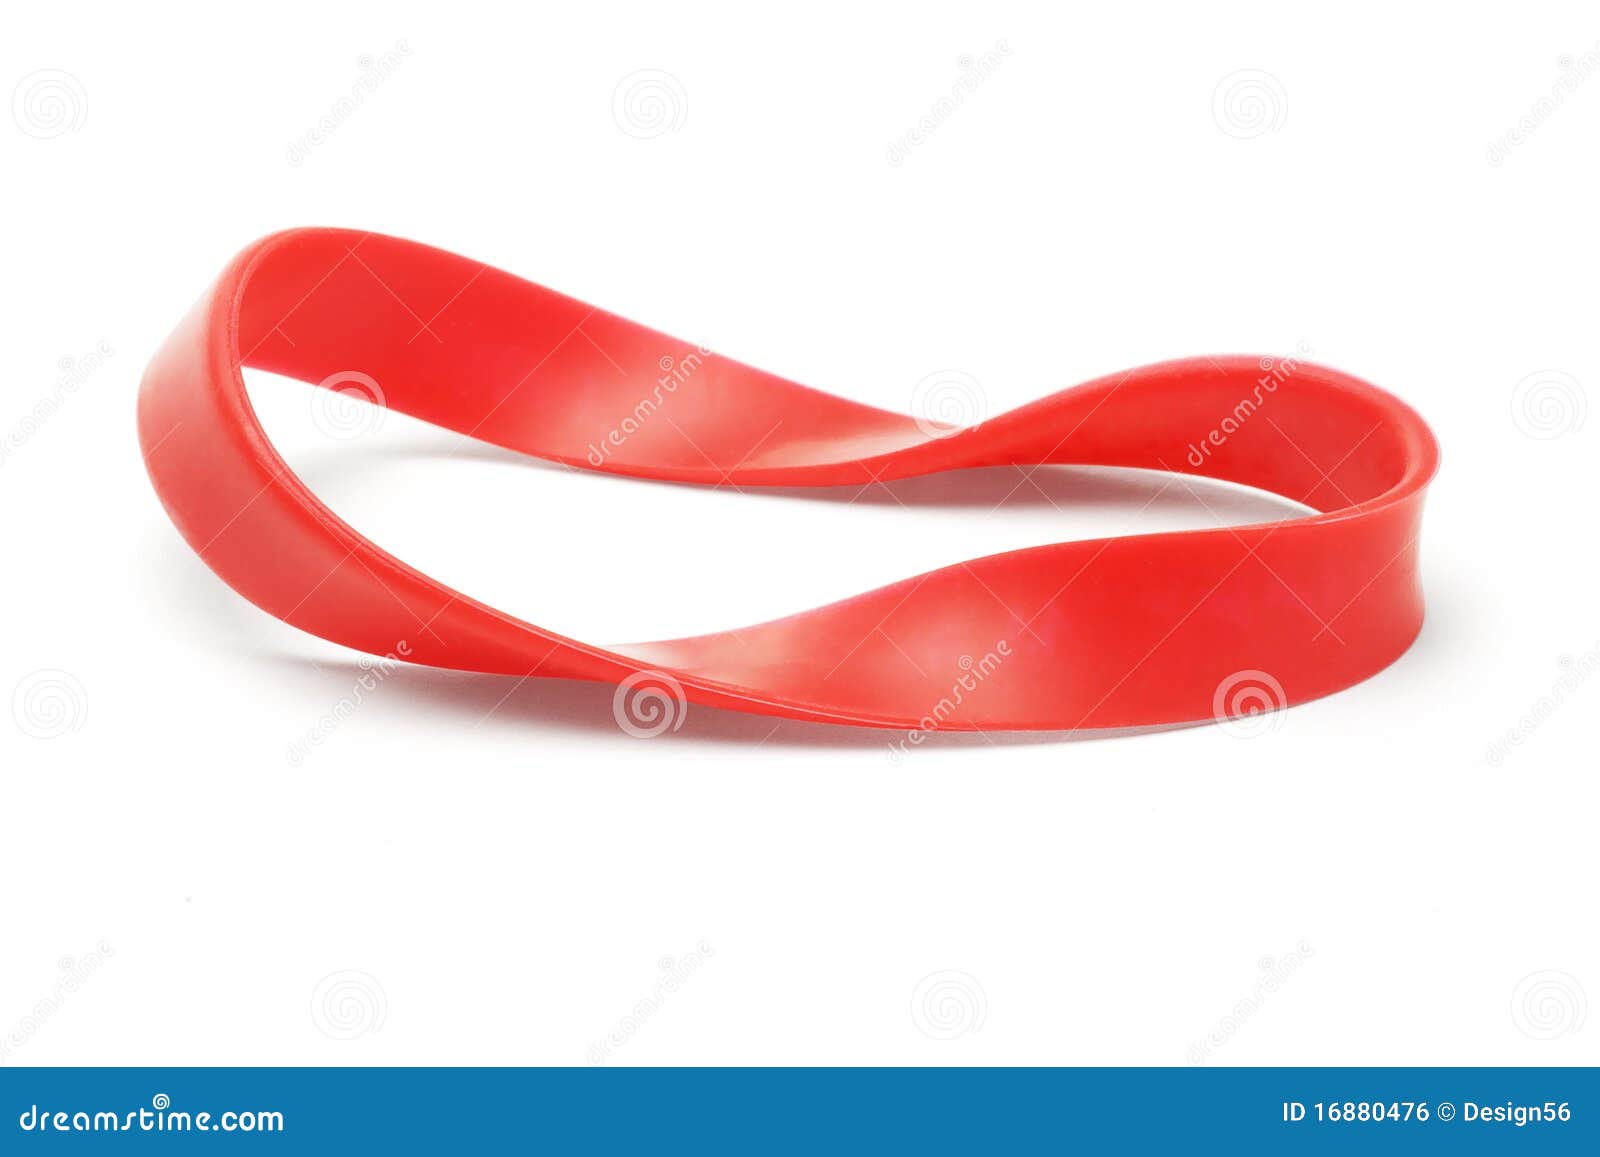 twisted red rubber wrist band